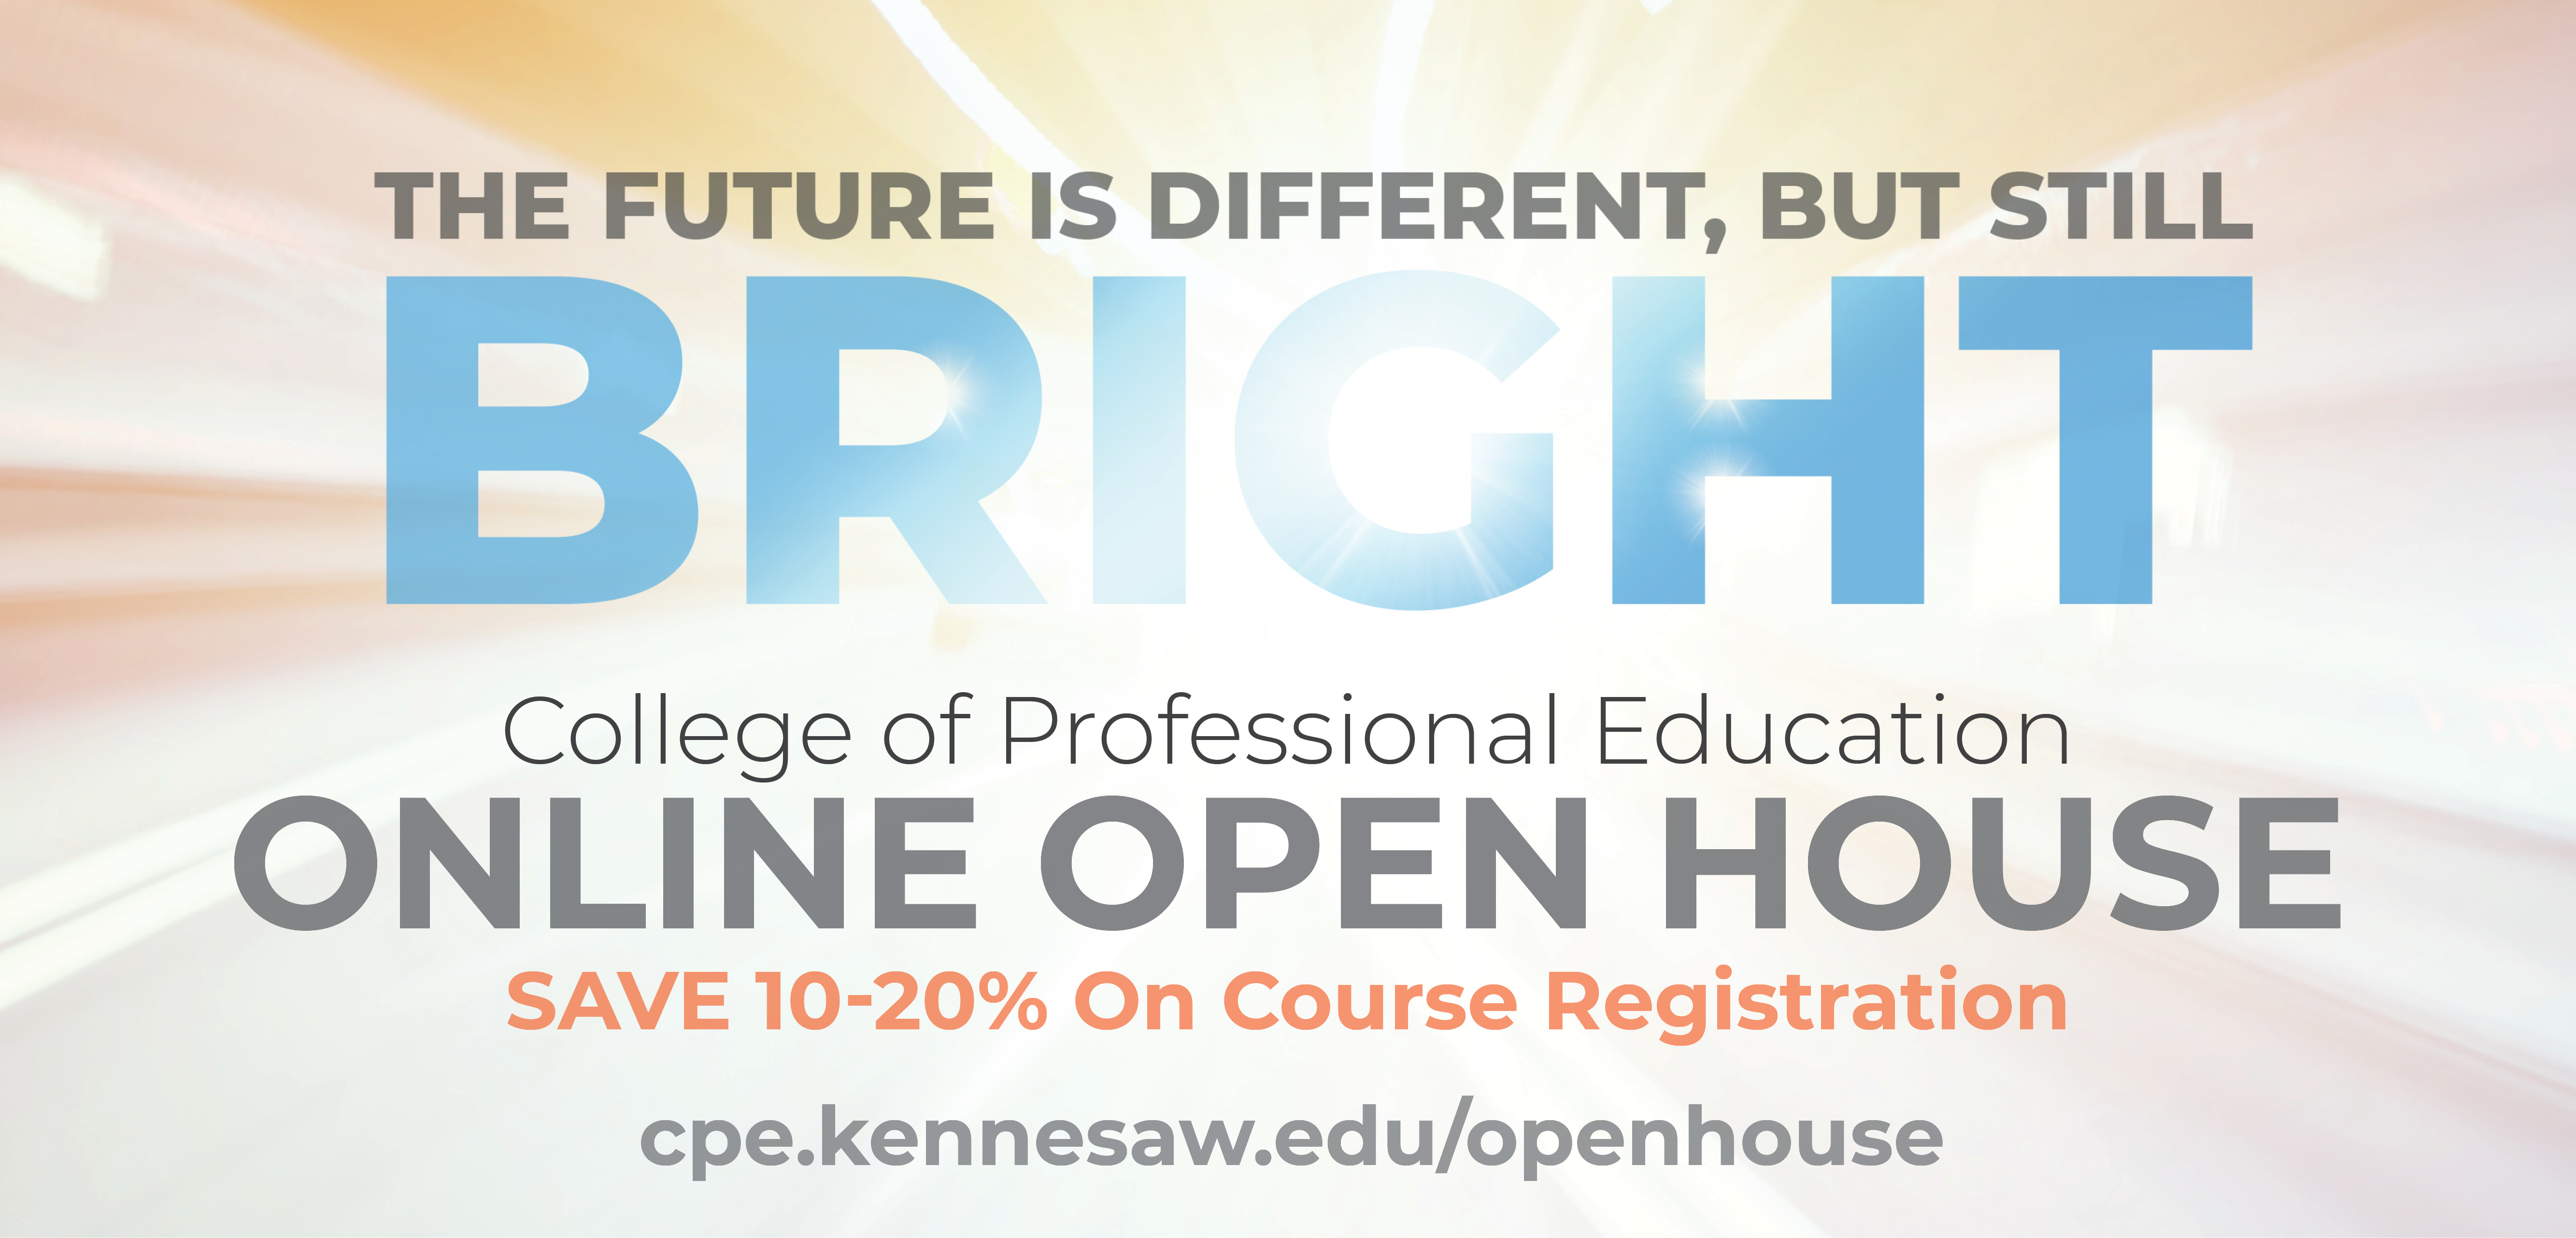 The Future is Different, but Still Bright, College of Professional Education Open House, Save 10-20% on course registration